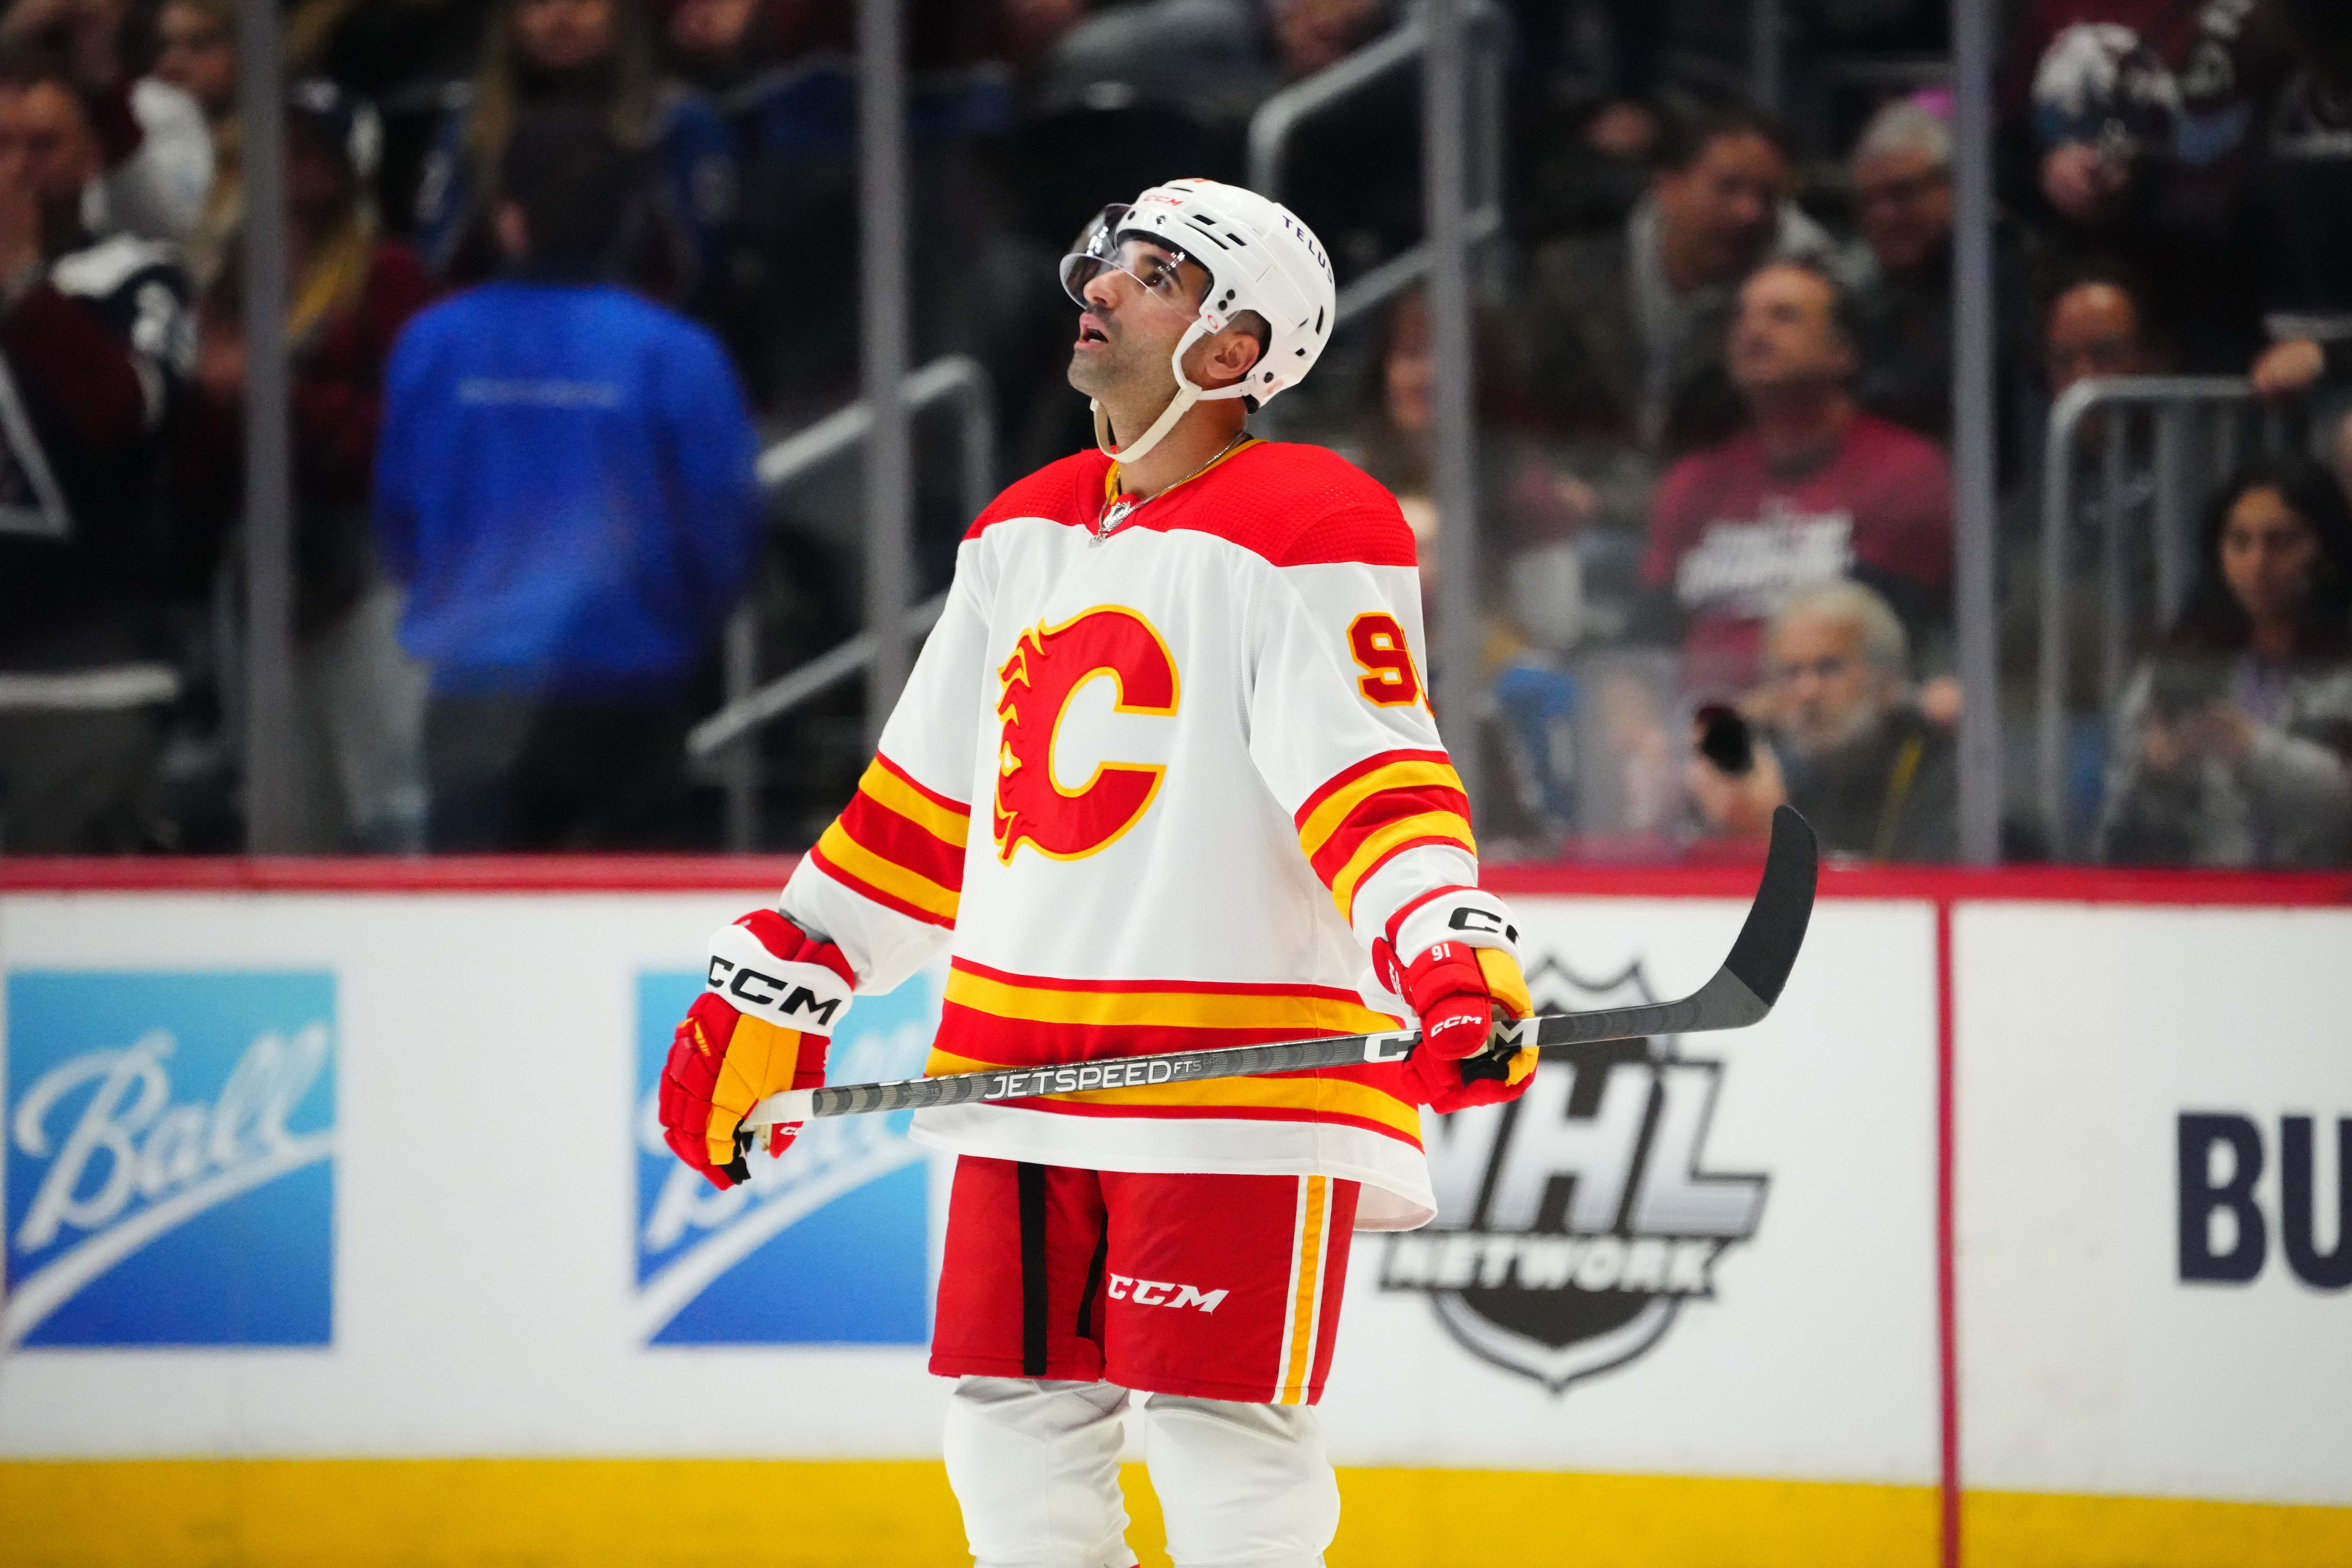 NHL News: Nazem Kadri to sign with Calgary Flames, who are not the